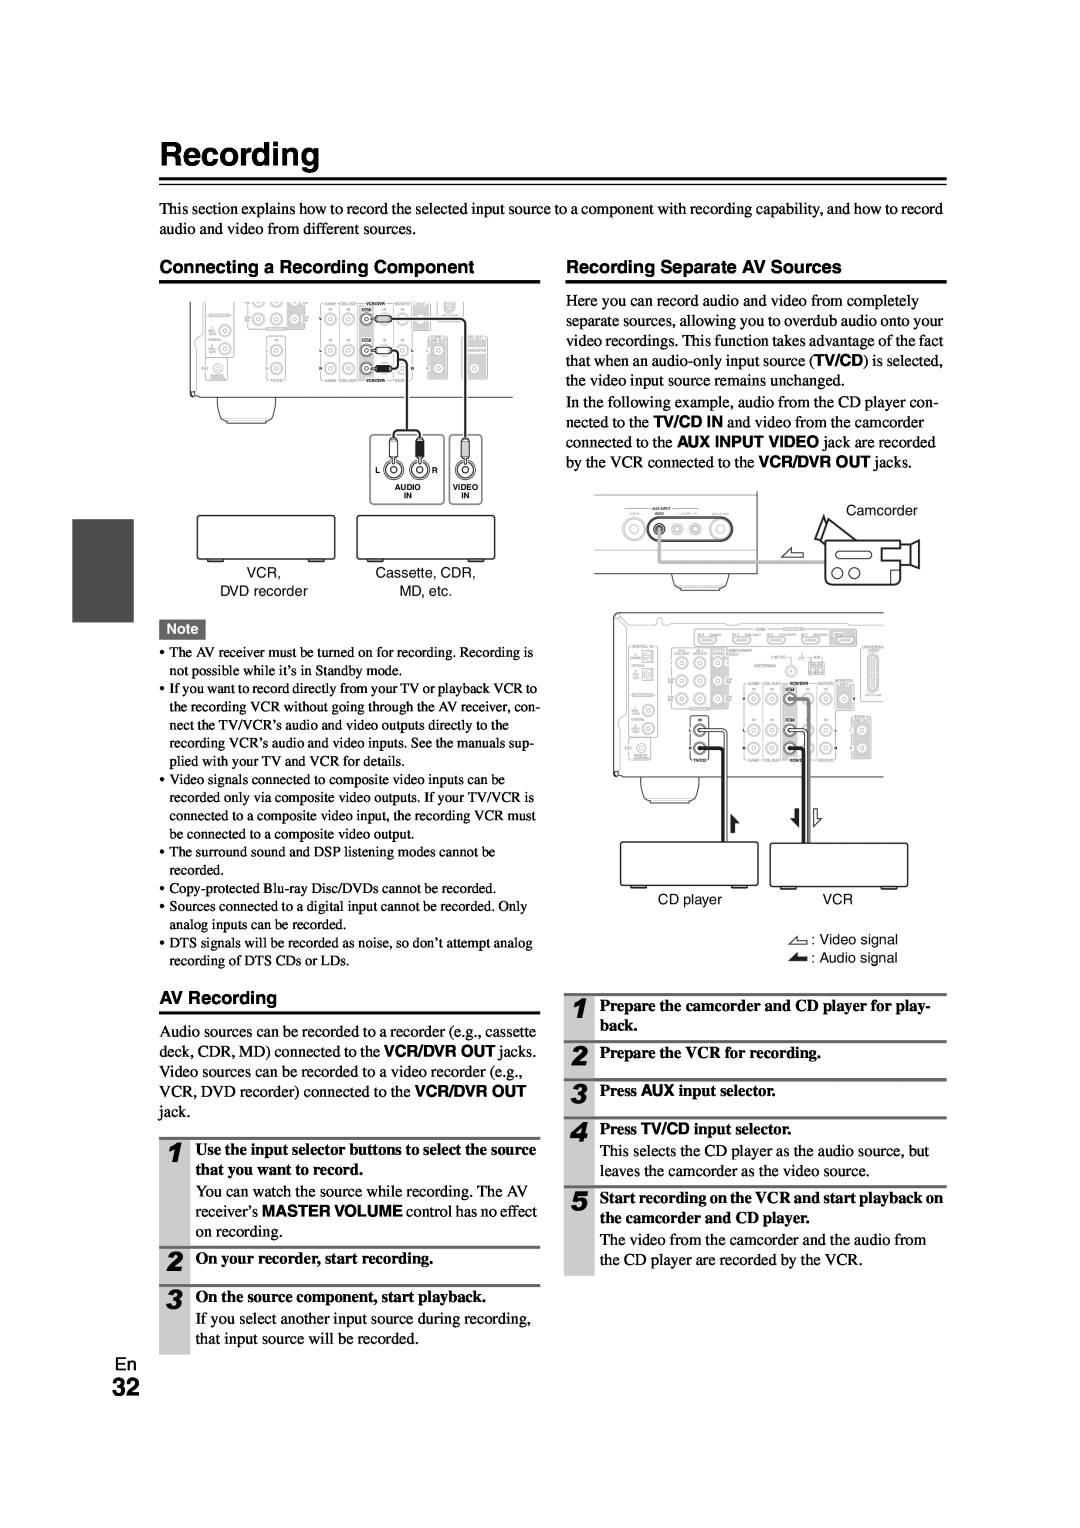 Onkyo HT-S7300 instruction manual Connecting a Recording Component, Recording Separate AV Sources, AV Recording 